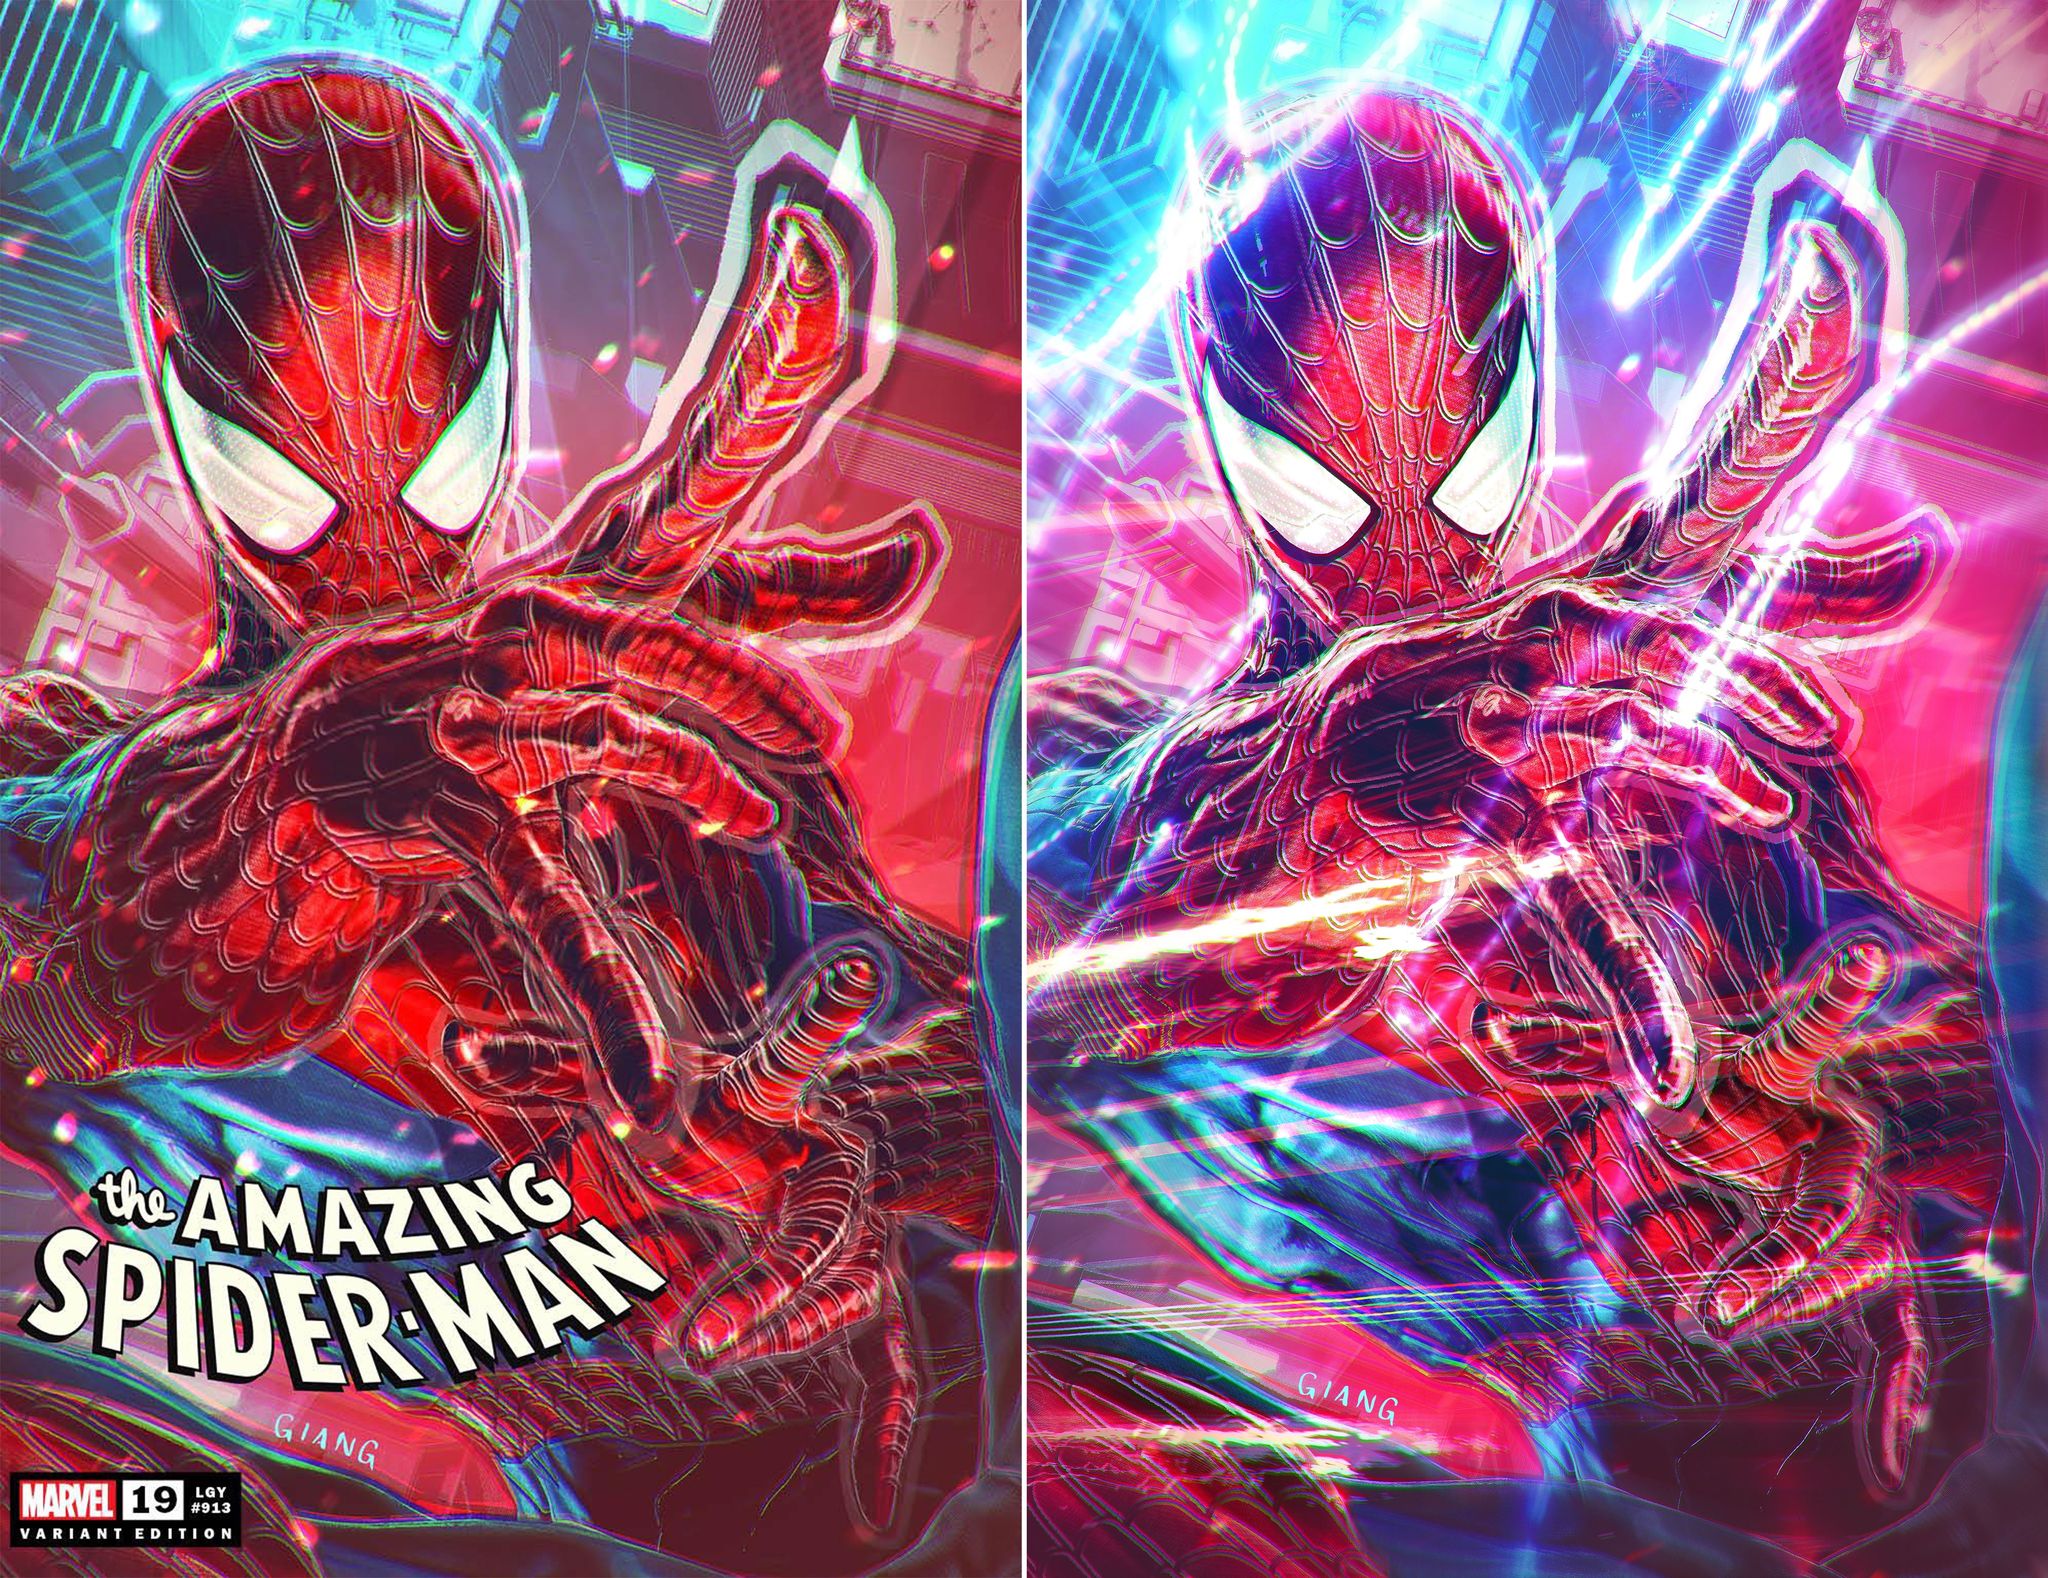 AMAZING SPIDER-MAN #19 JOHN GIANG EXCLUSIVE VARIANT OPTIONS